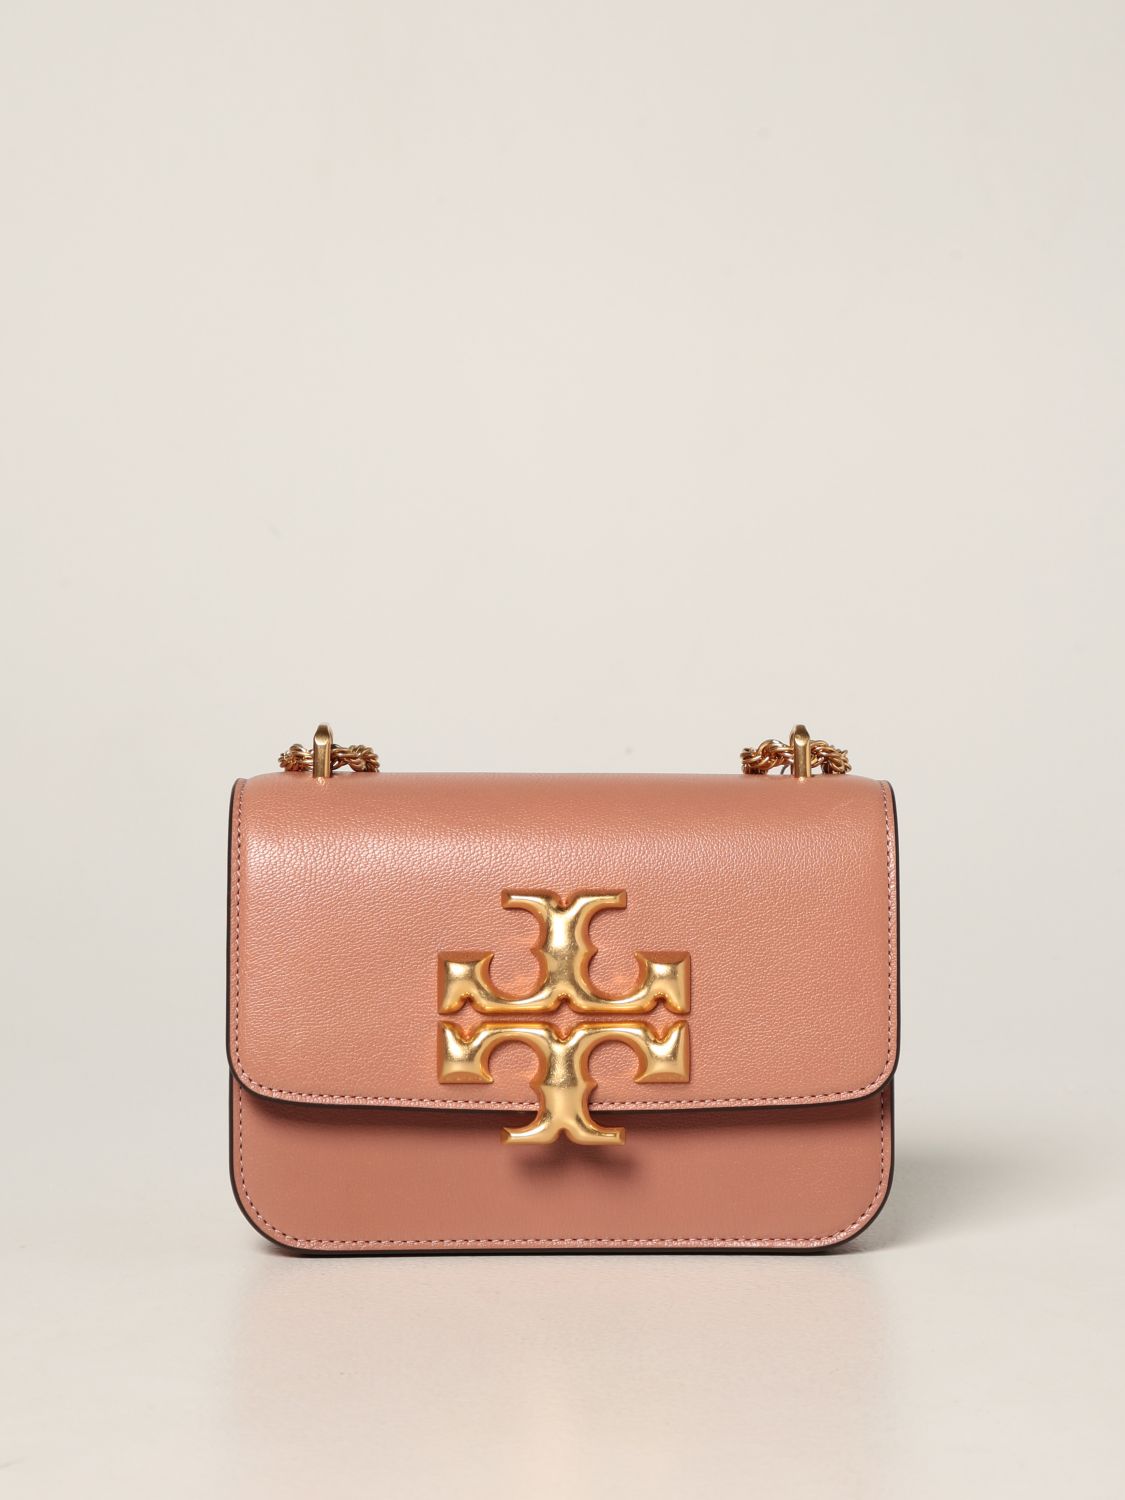 Tory Burch York Saffiano Leather Tote - Light Pink - $139 - From Emily